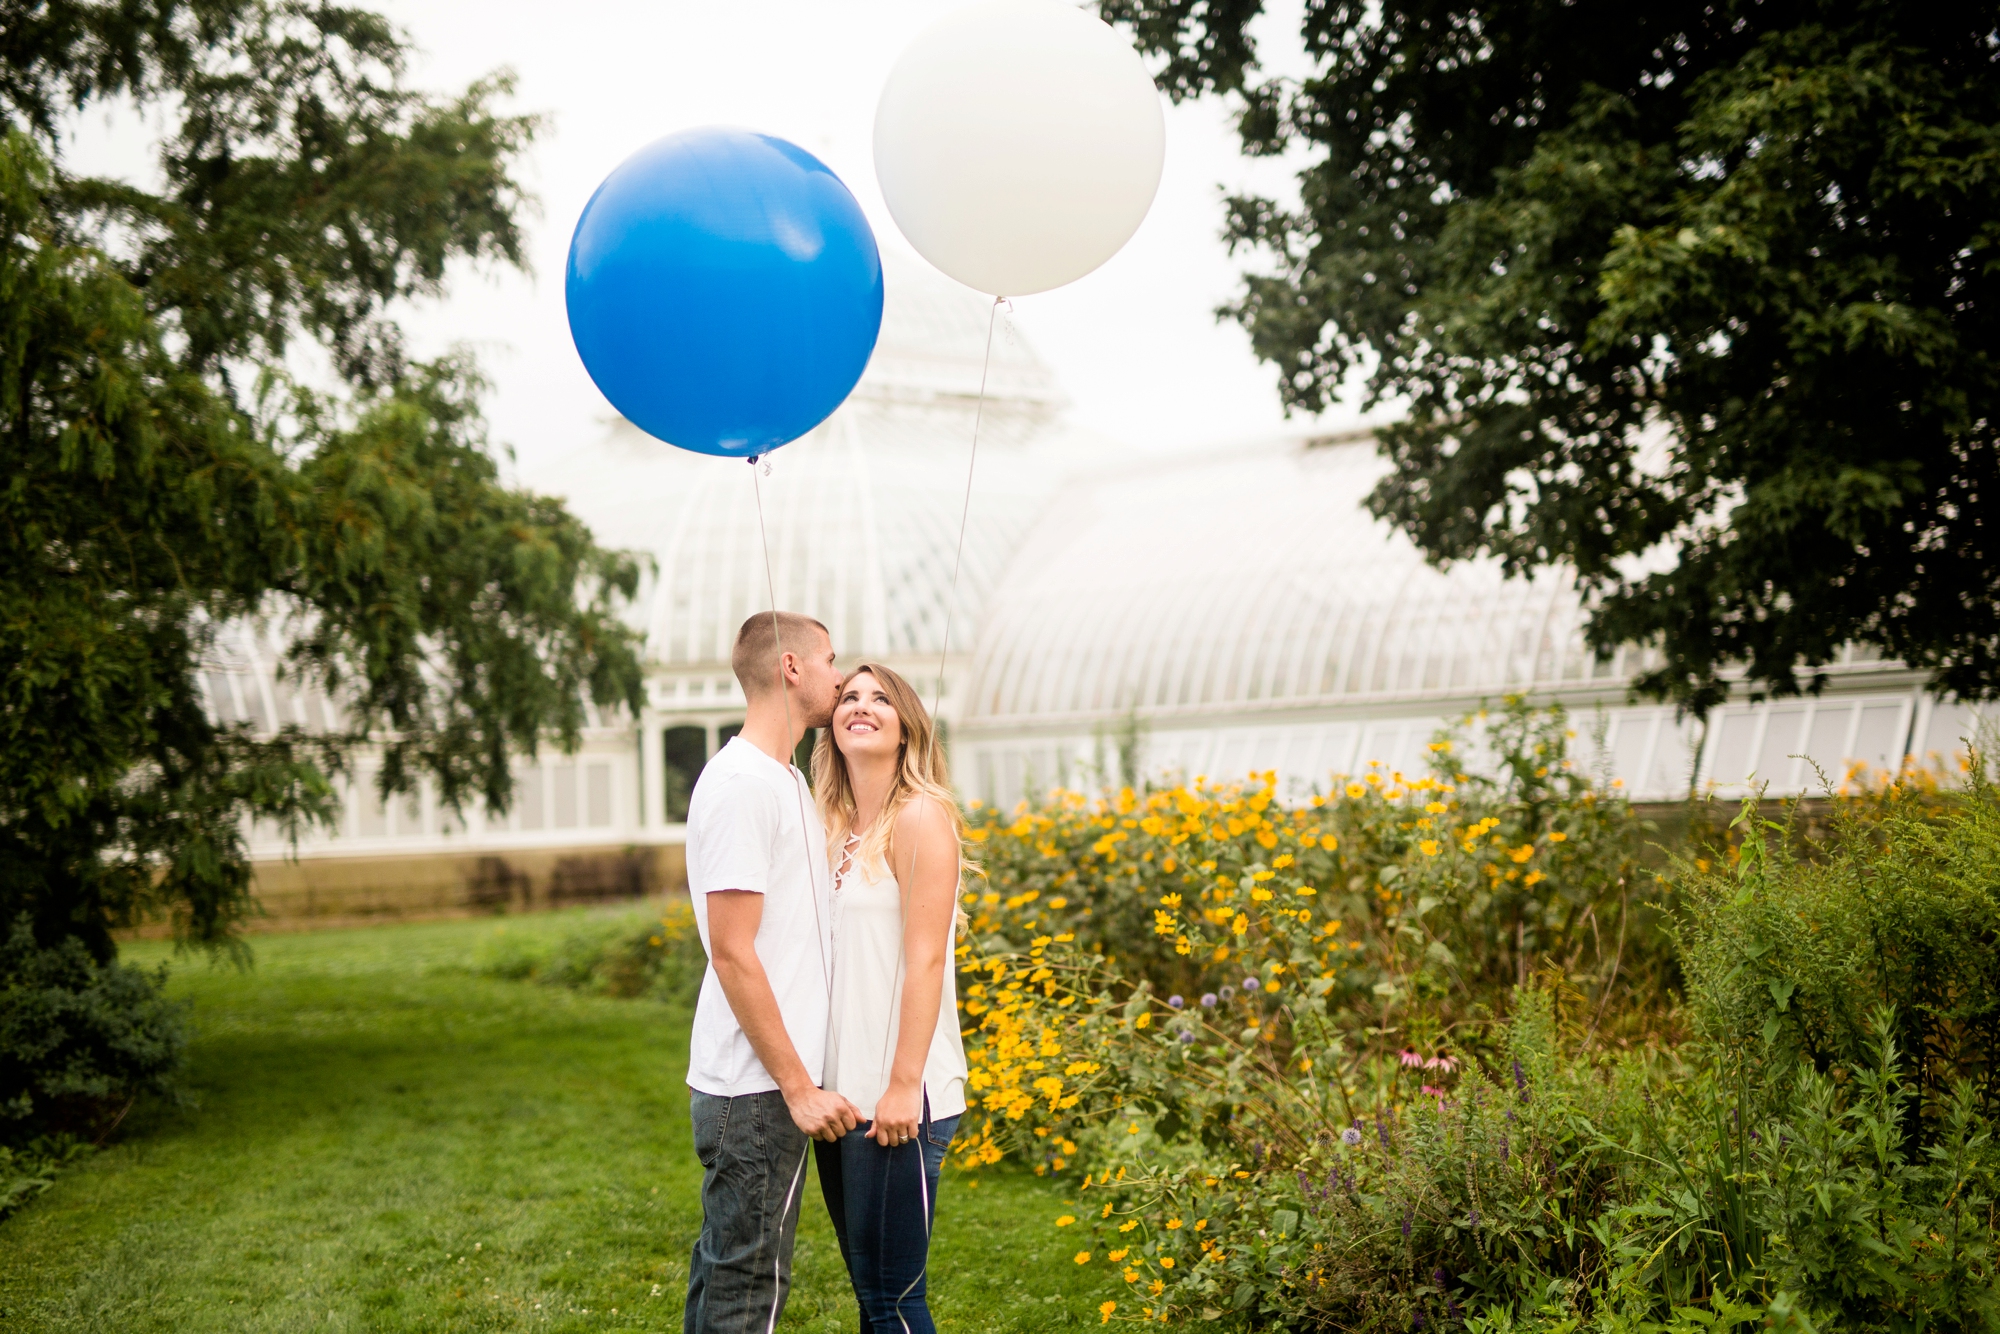 phipps conservatory engagement photos, phipps conservatory engagement photos, phipps conservatory wedding photos, phipps conservatory wedding photographer